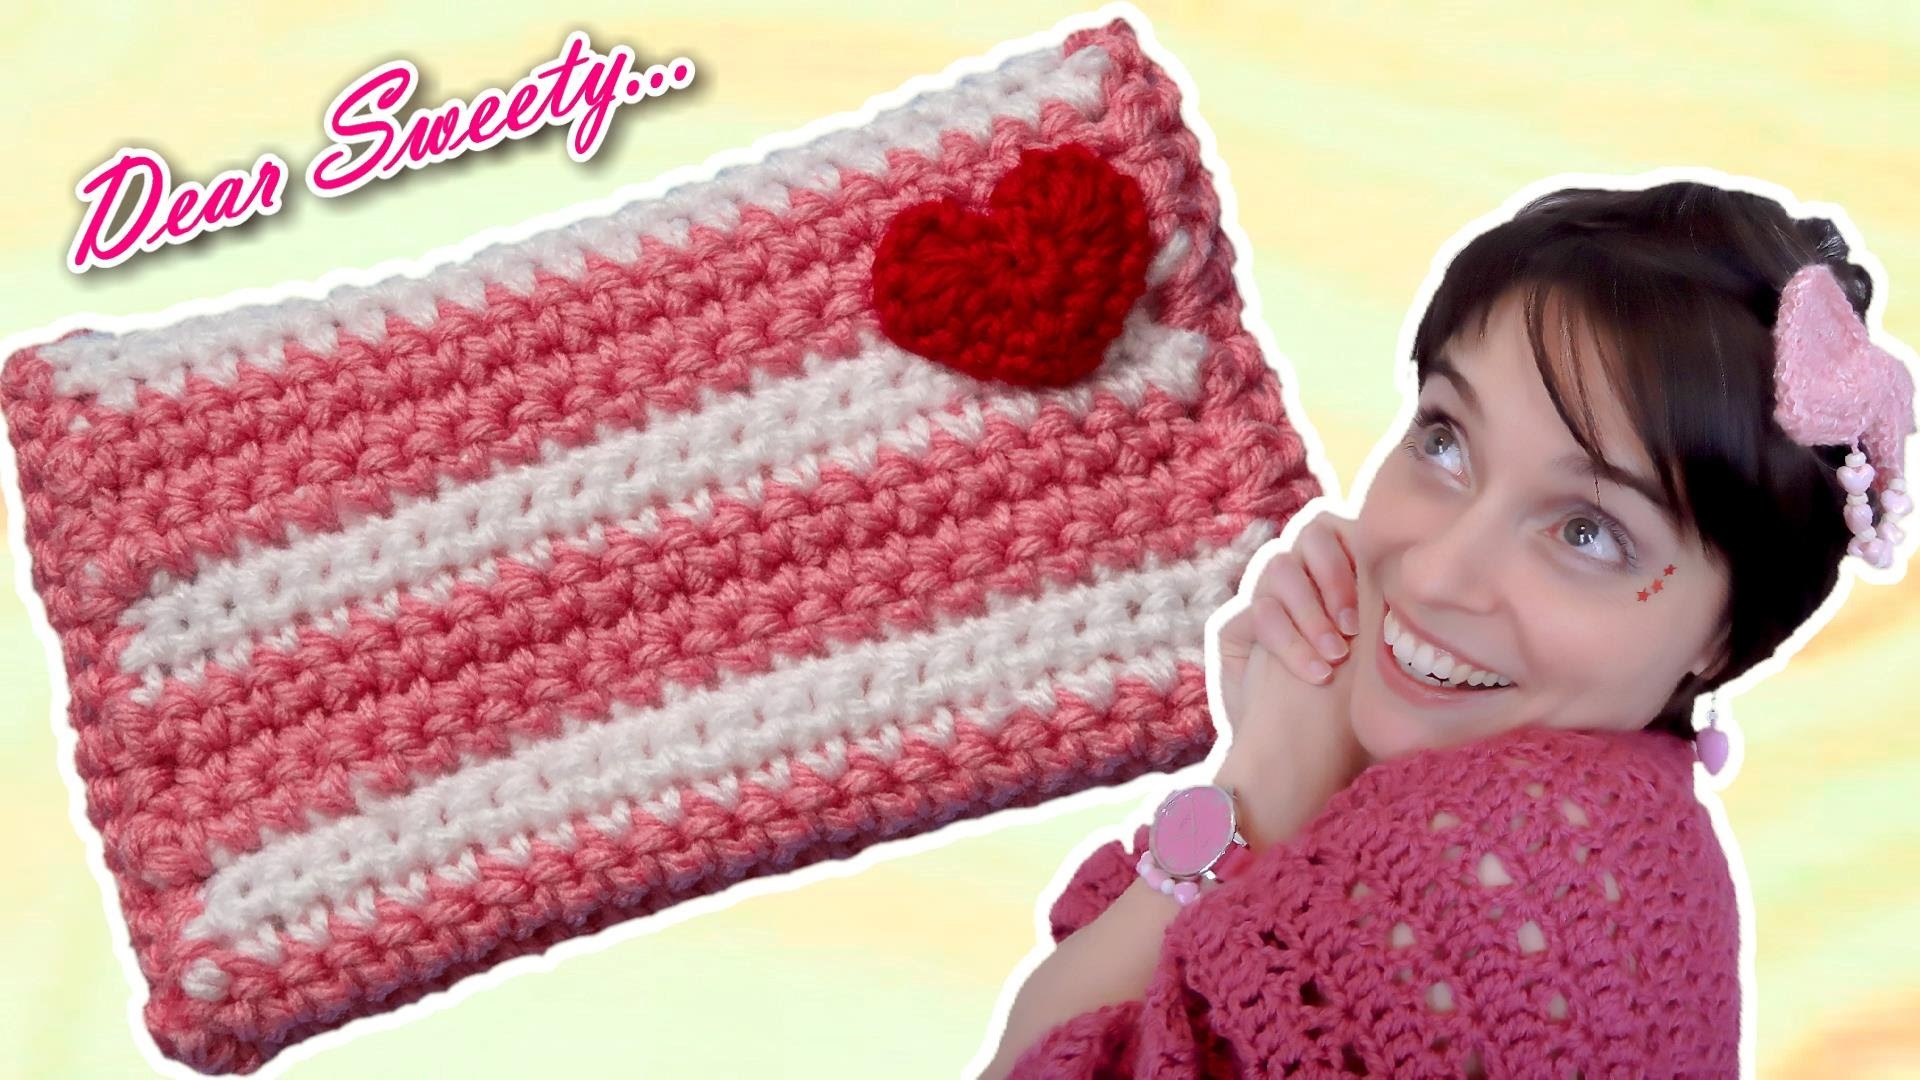 Crochet Envelope Tutorial - Perfect for a Gift Card!